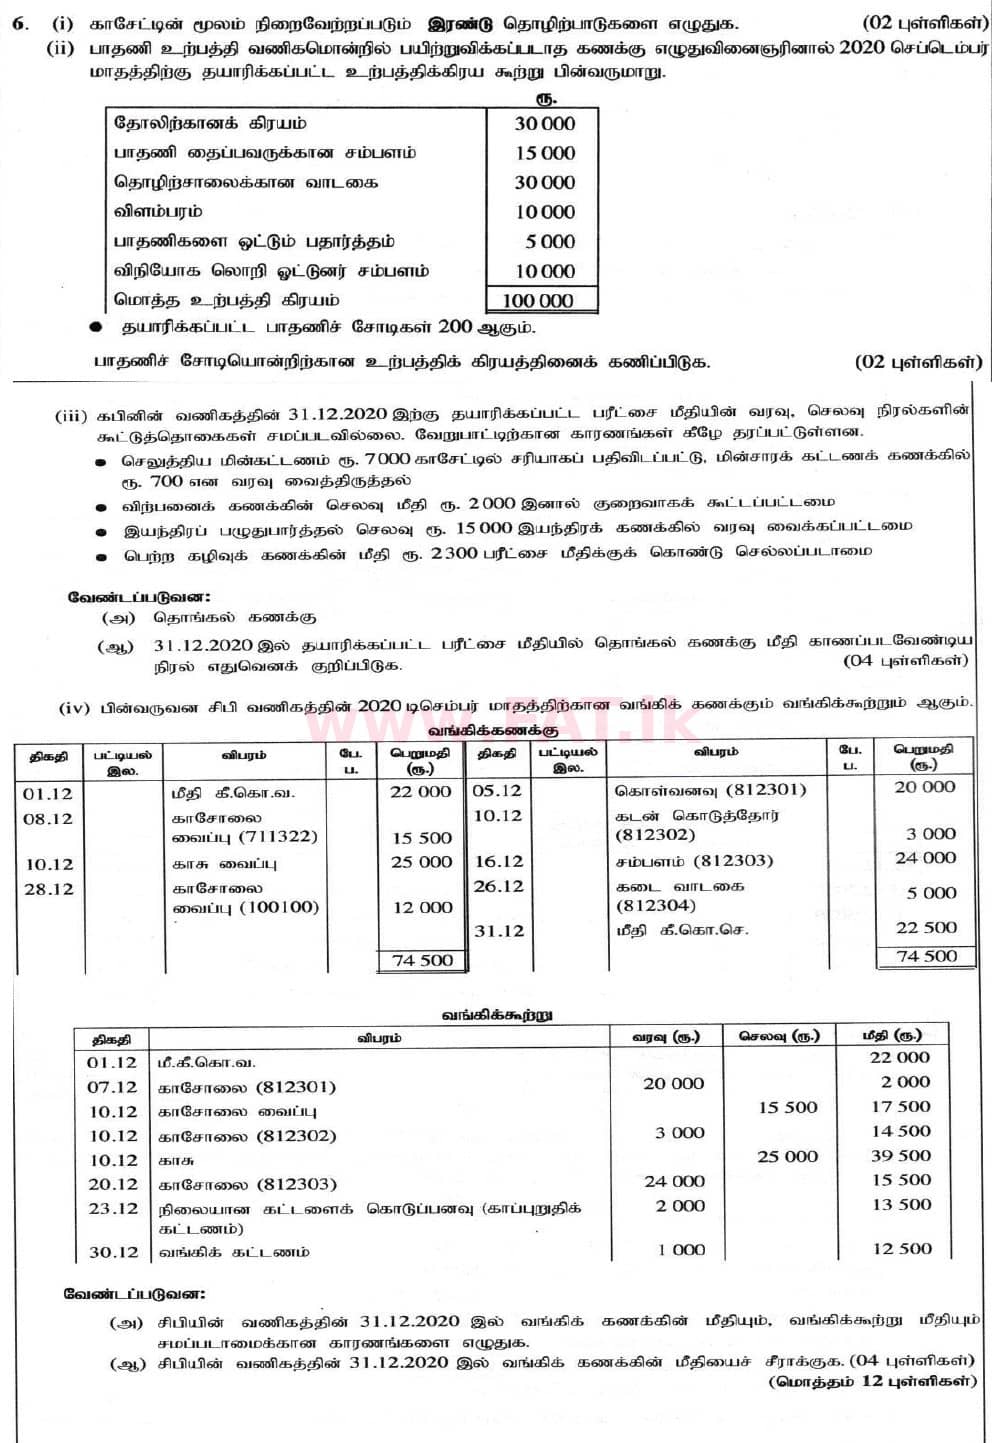 National Syllabus : Ordinary Level (O/L) Business and Accounting Studies - 2020 March - Paper II (தமிழ் Medium) 6 1